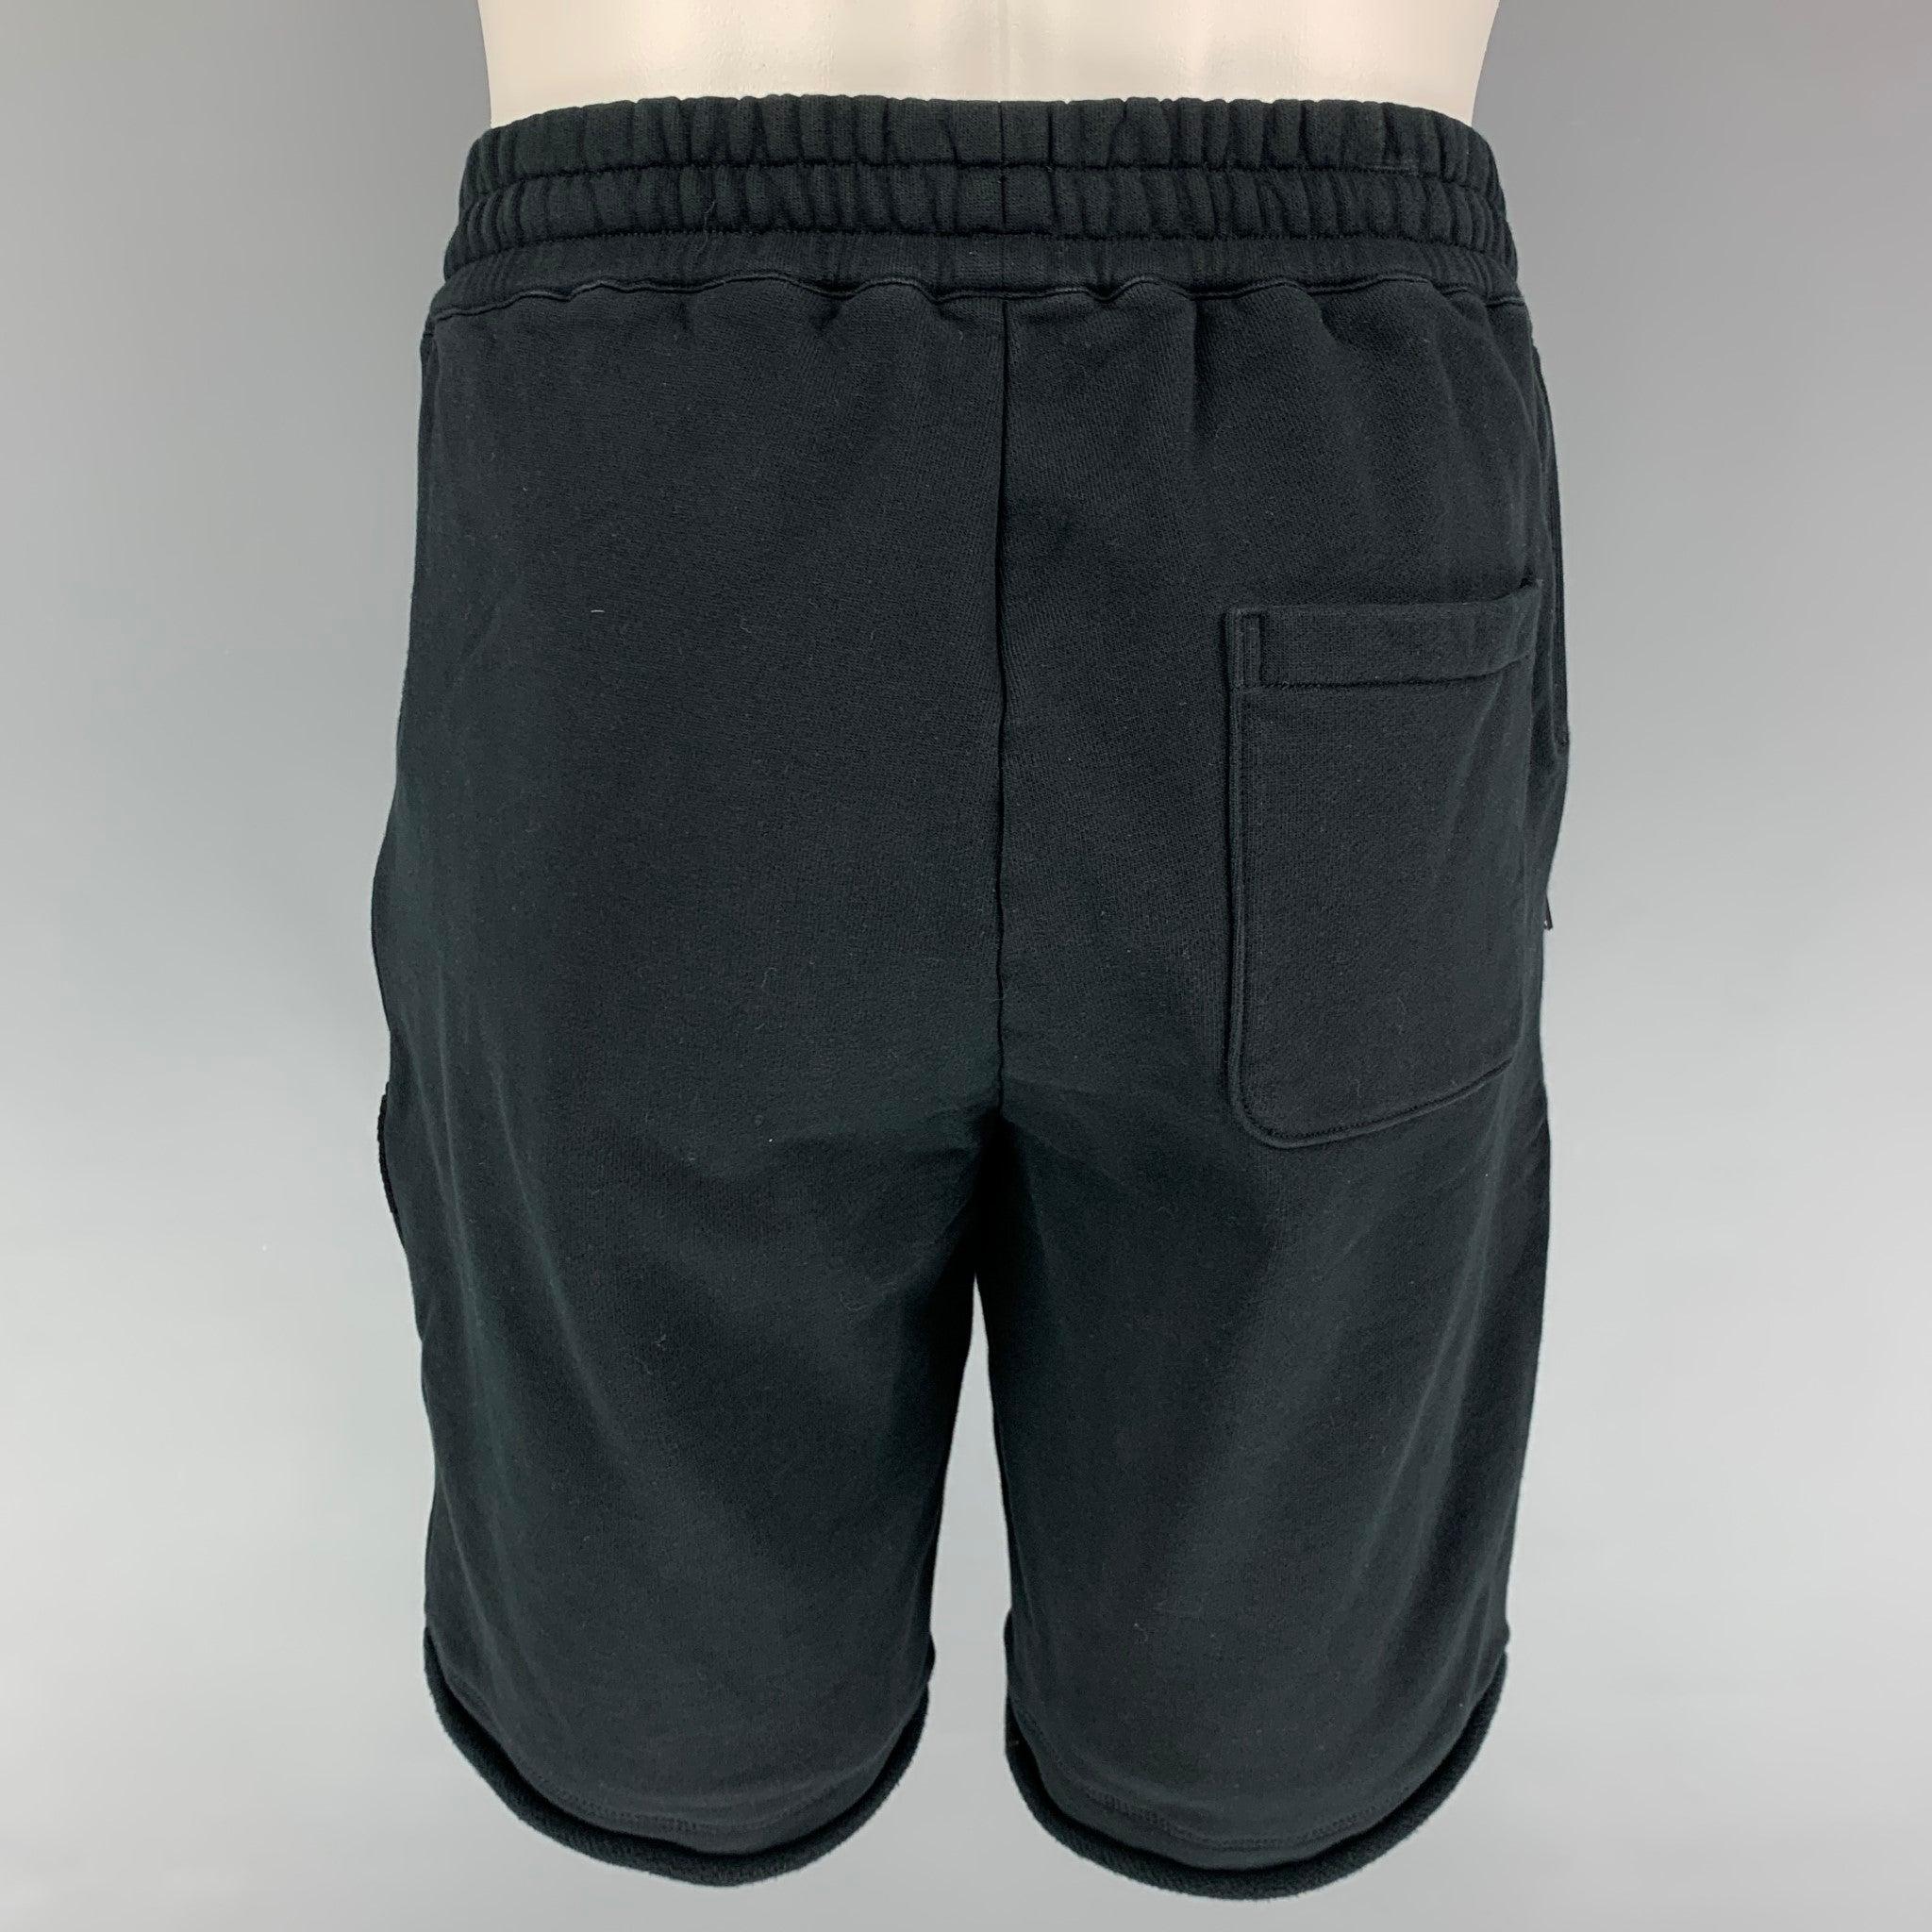 3.1 PHILLIP LIM shorts comes in a black cotton featuring a elastic waistband, zipper pockets, and a drawstring.
 Very Good
 Pre-Owned Condition. 
 

 Marked:  S 
 

 Measurements: 
  Waist: 28 inches Rise: 12.5 inches Inseam: 9.5 inches 
  
  
  
